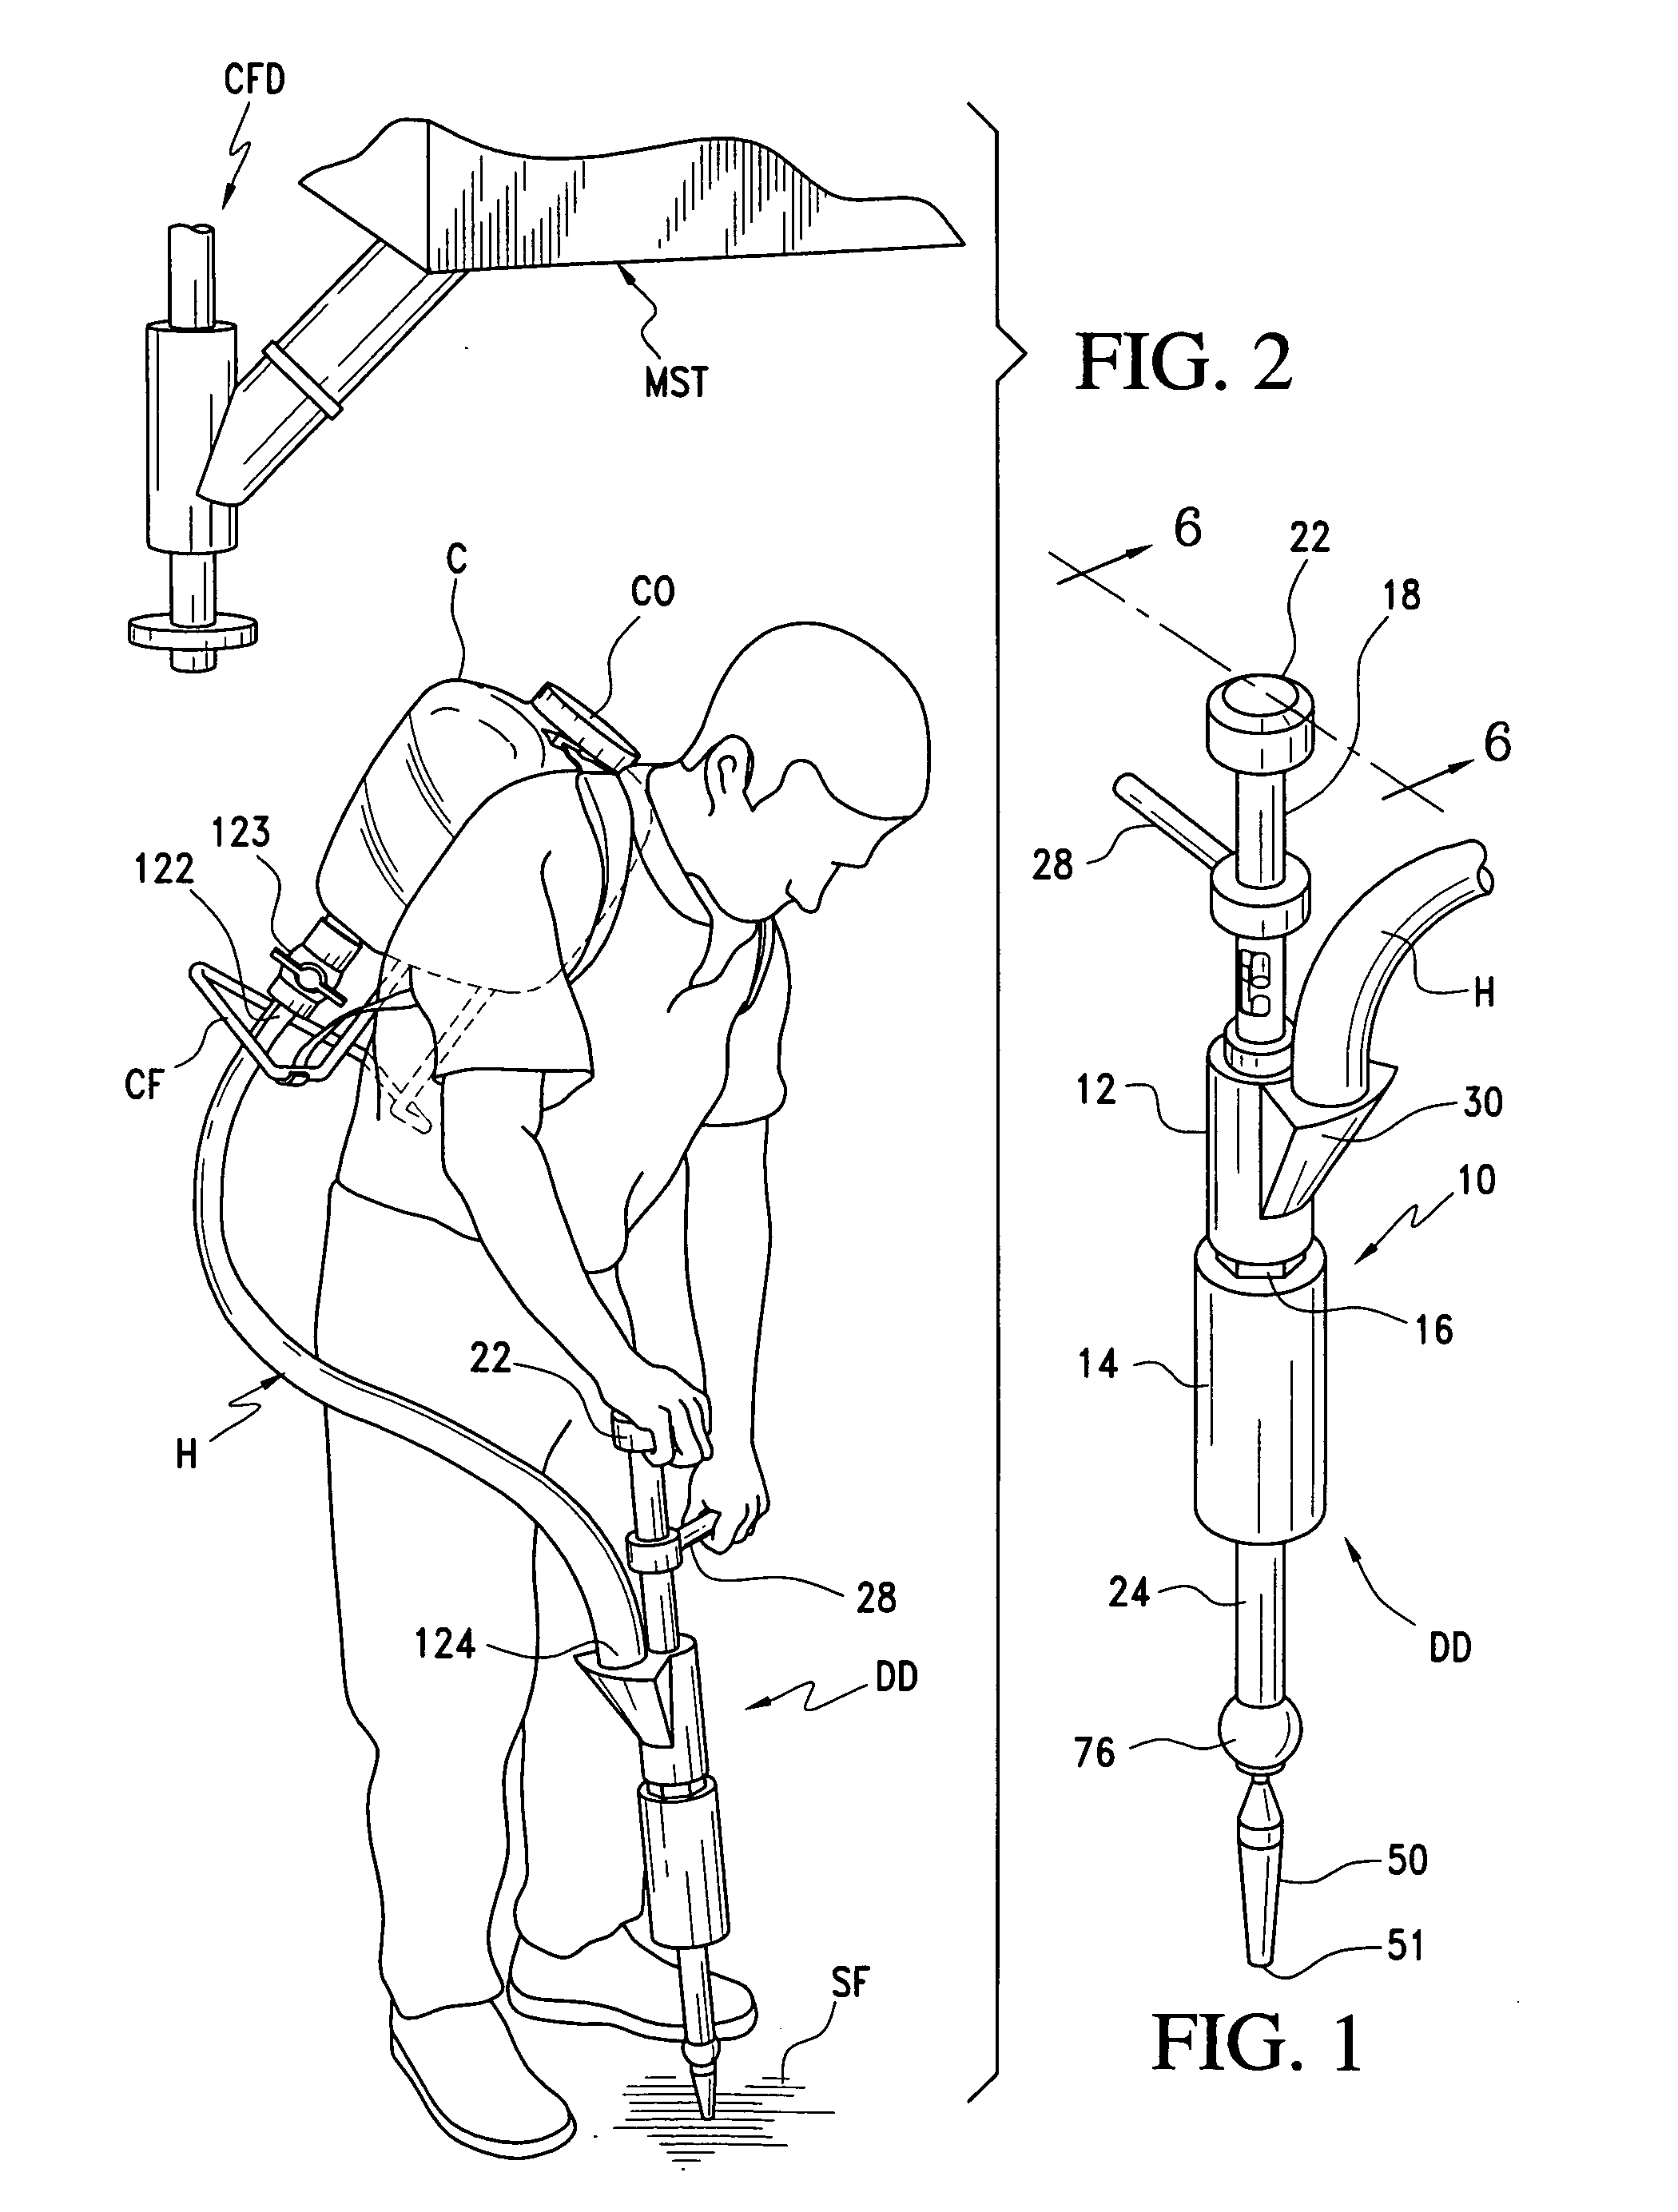 Method and device for dispensing a fertilizer, pesticide, fungicide, herbicide, insecticide, chemical, or the like material